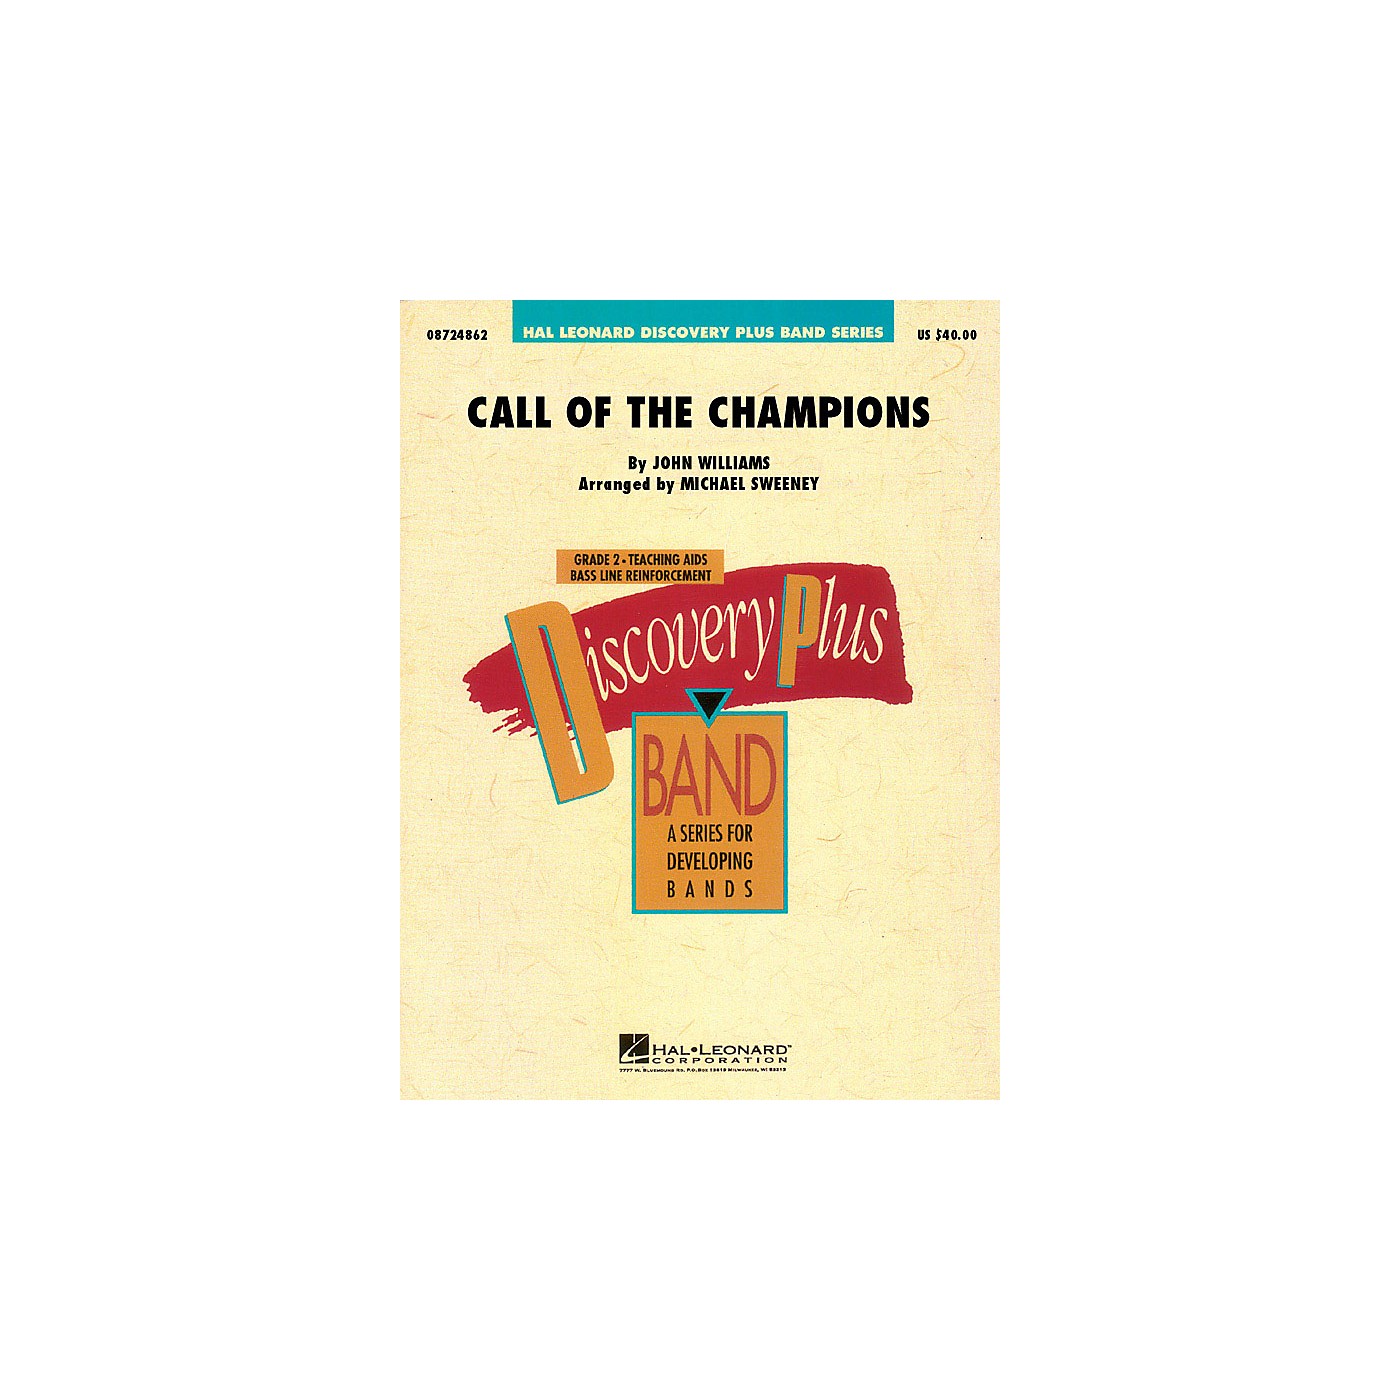 Hal Leonard Call of the Champions - Discovery Plus Concert Band Series Level 2 arranged by Michael Sweeney thumbnail